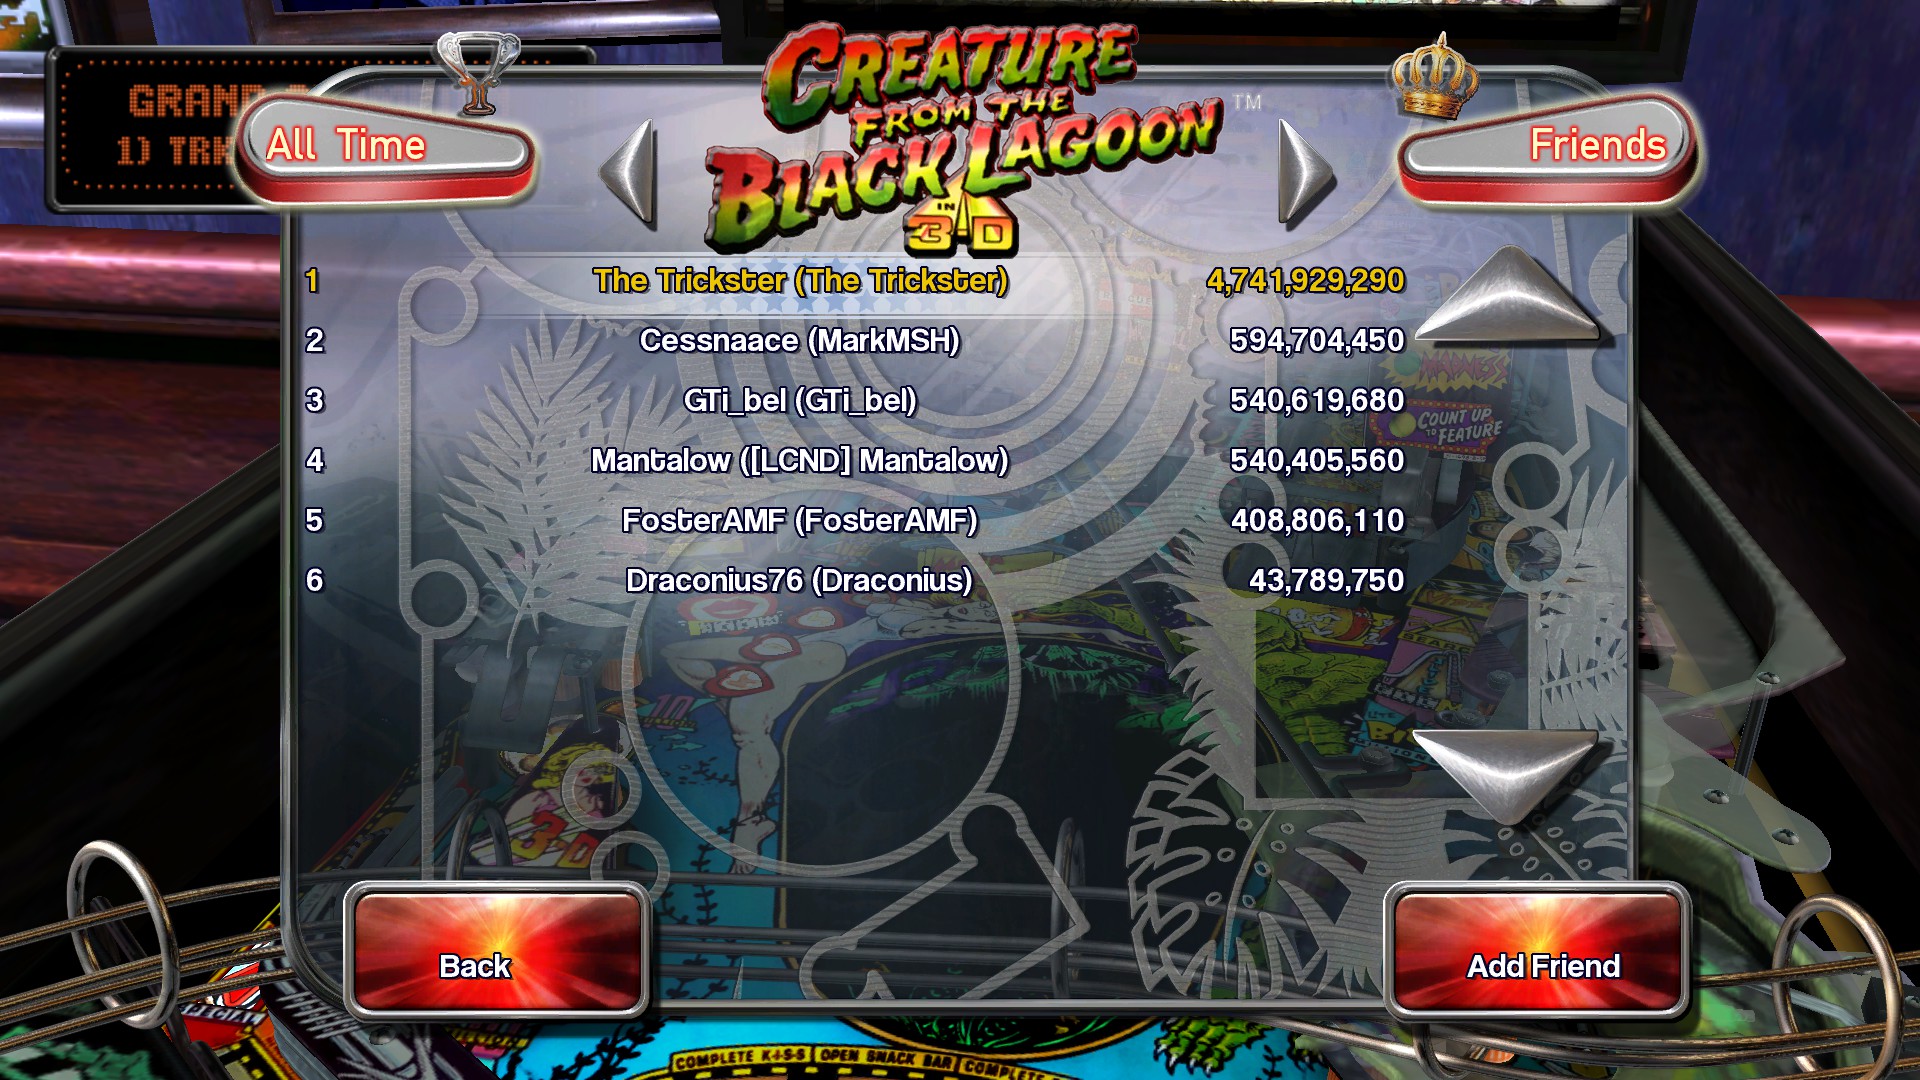 TheTrickster: Pinball Arcade: Creature From the Black Lagoon (PC) 4,741,929,290 points on 2016-03-12 02:34:49